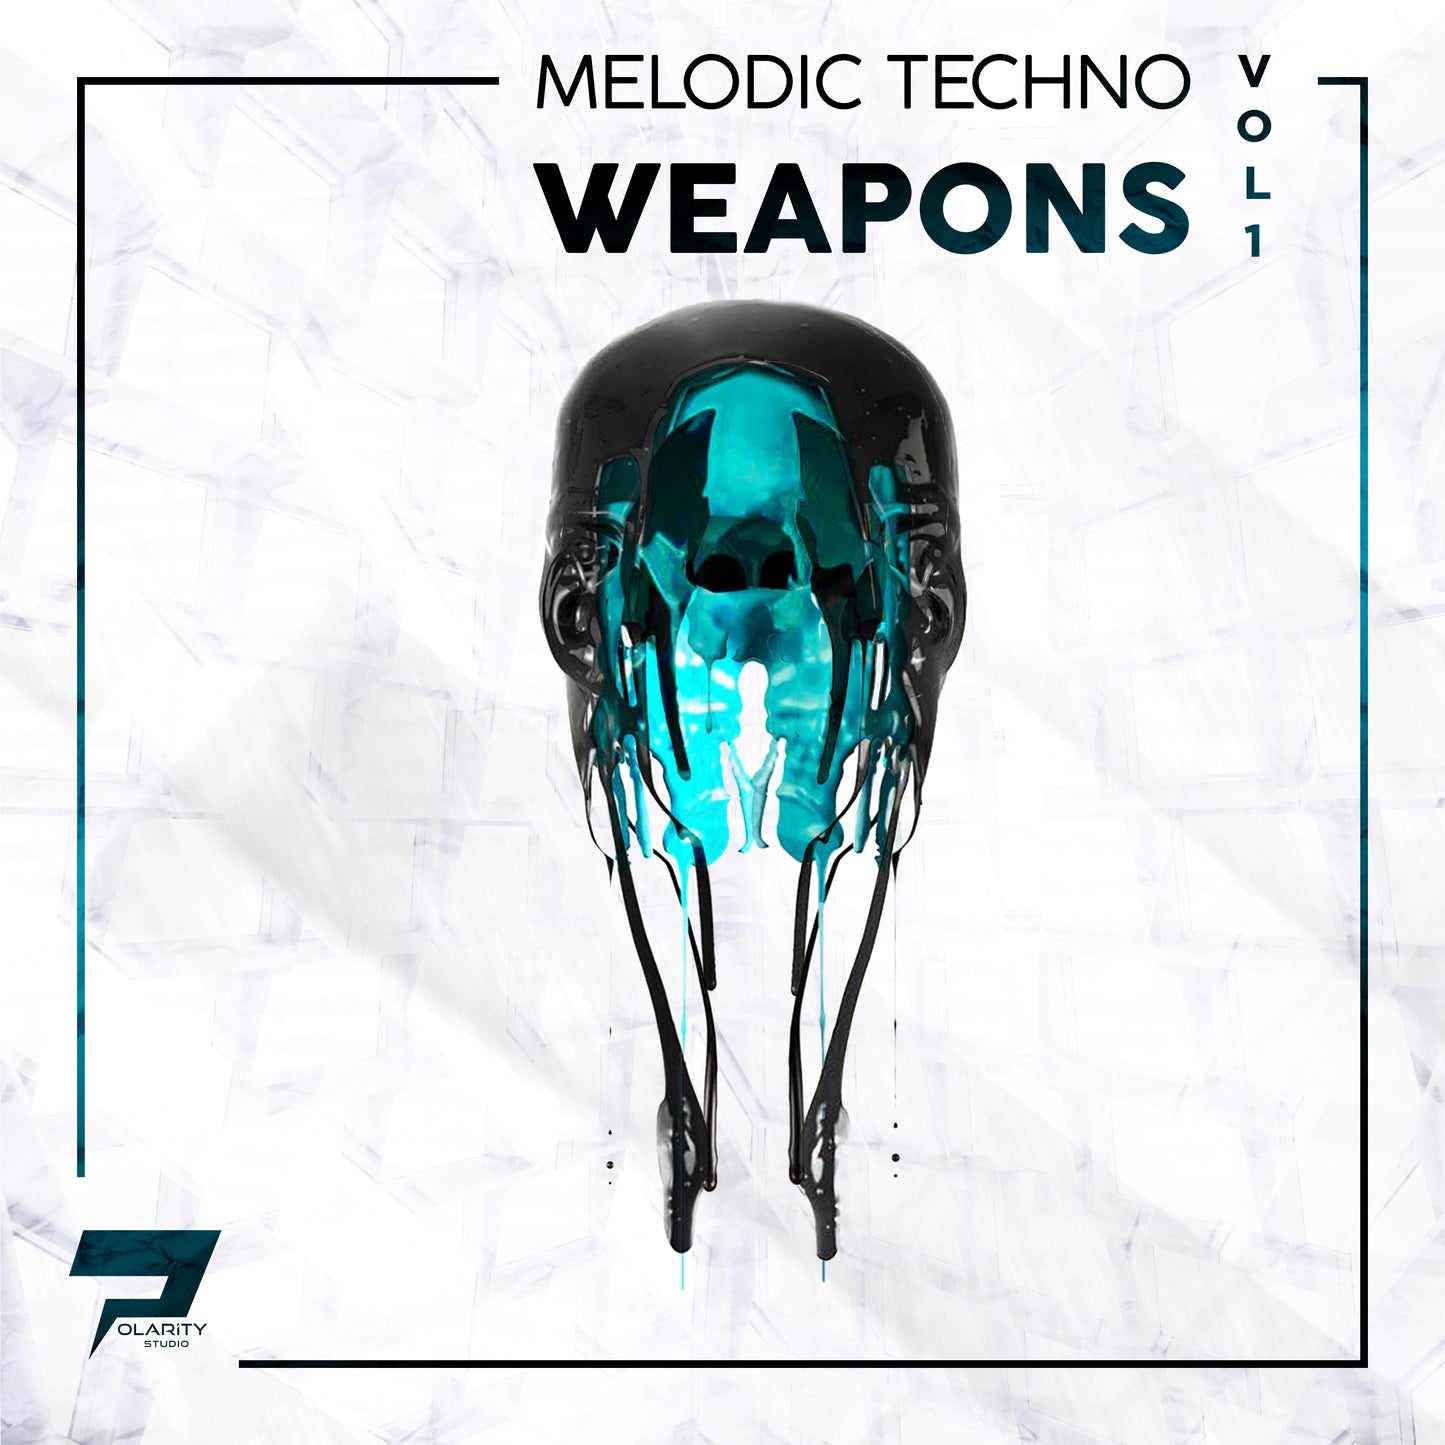 Melodic Techno Weapons Vol. 1